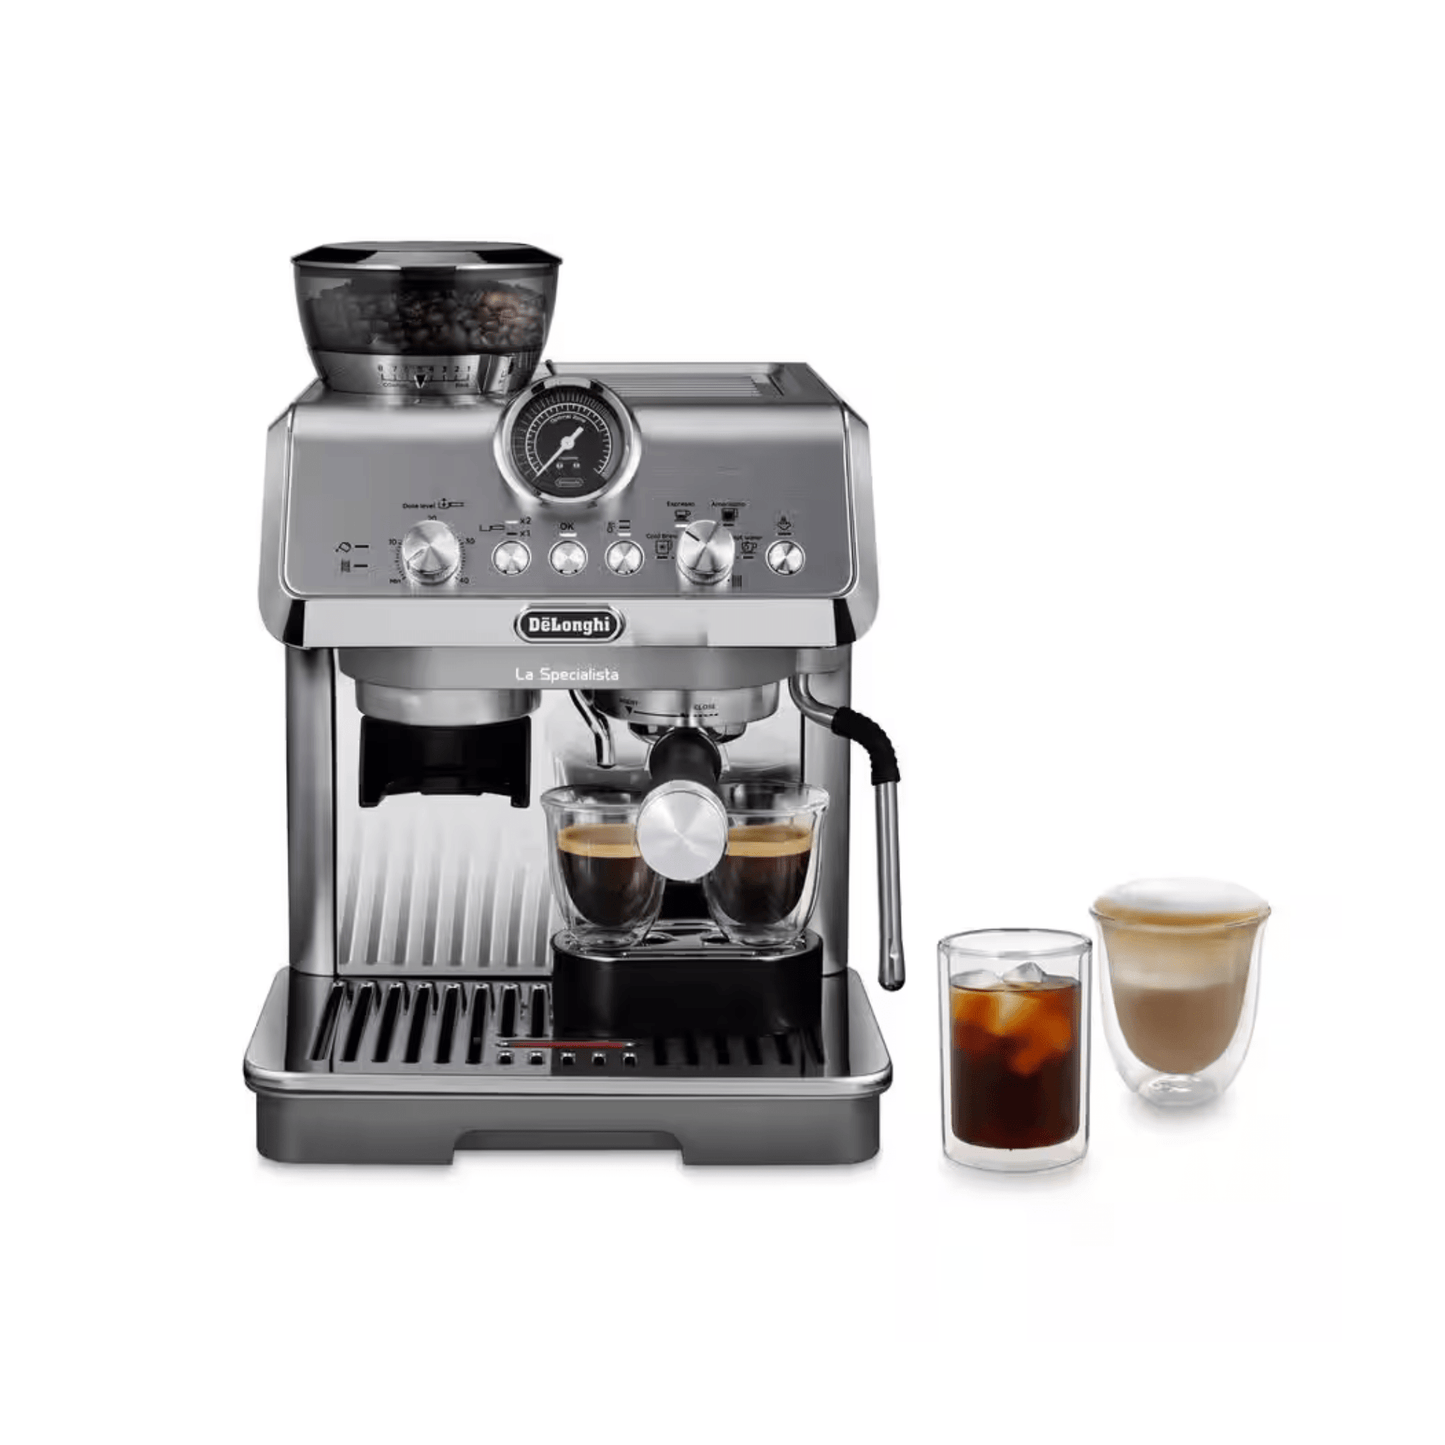 De'Longhi Dinamica Espresso Machine, Black - Automatic Bean-to-Cup Brewing,  Built-In Steel Burr Grinder & Manual Frother - One-Touch Hot & Iced Coffee